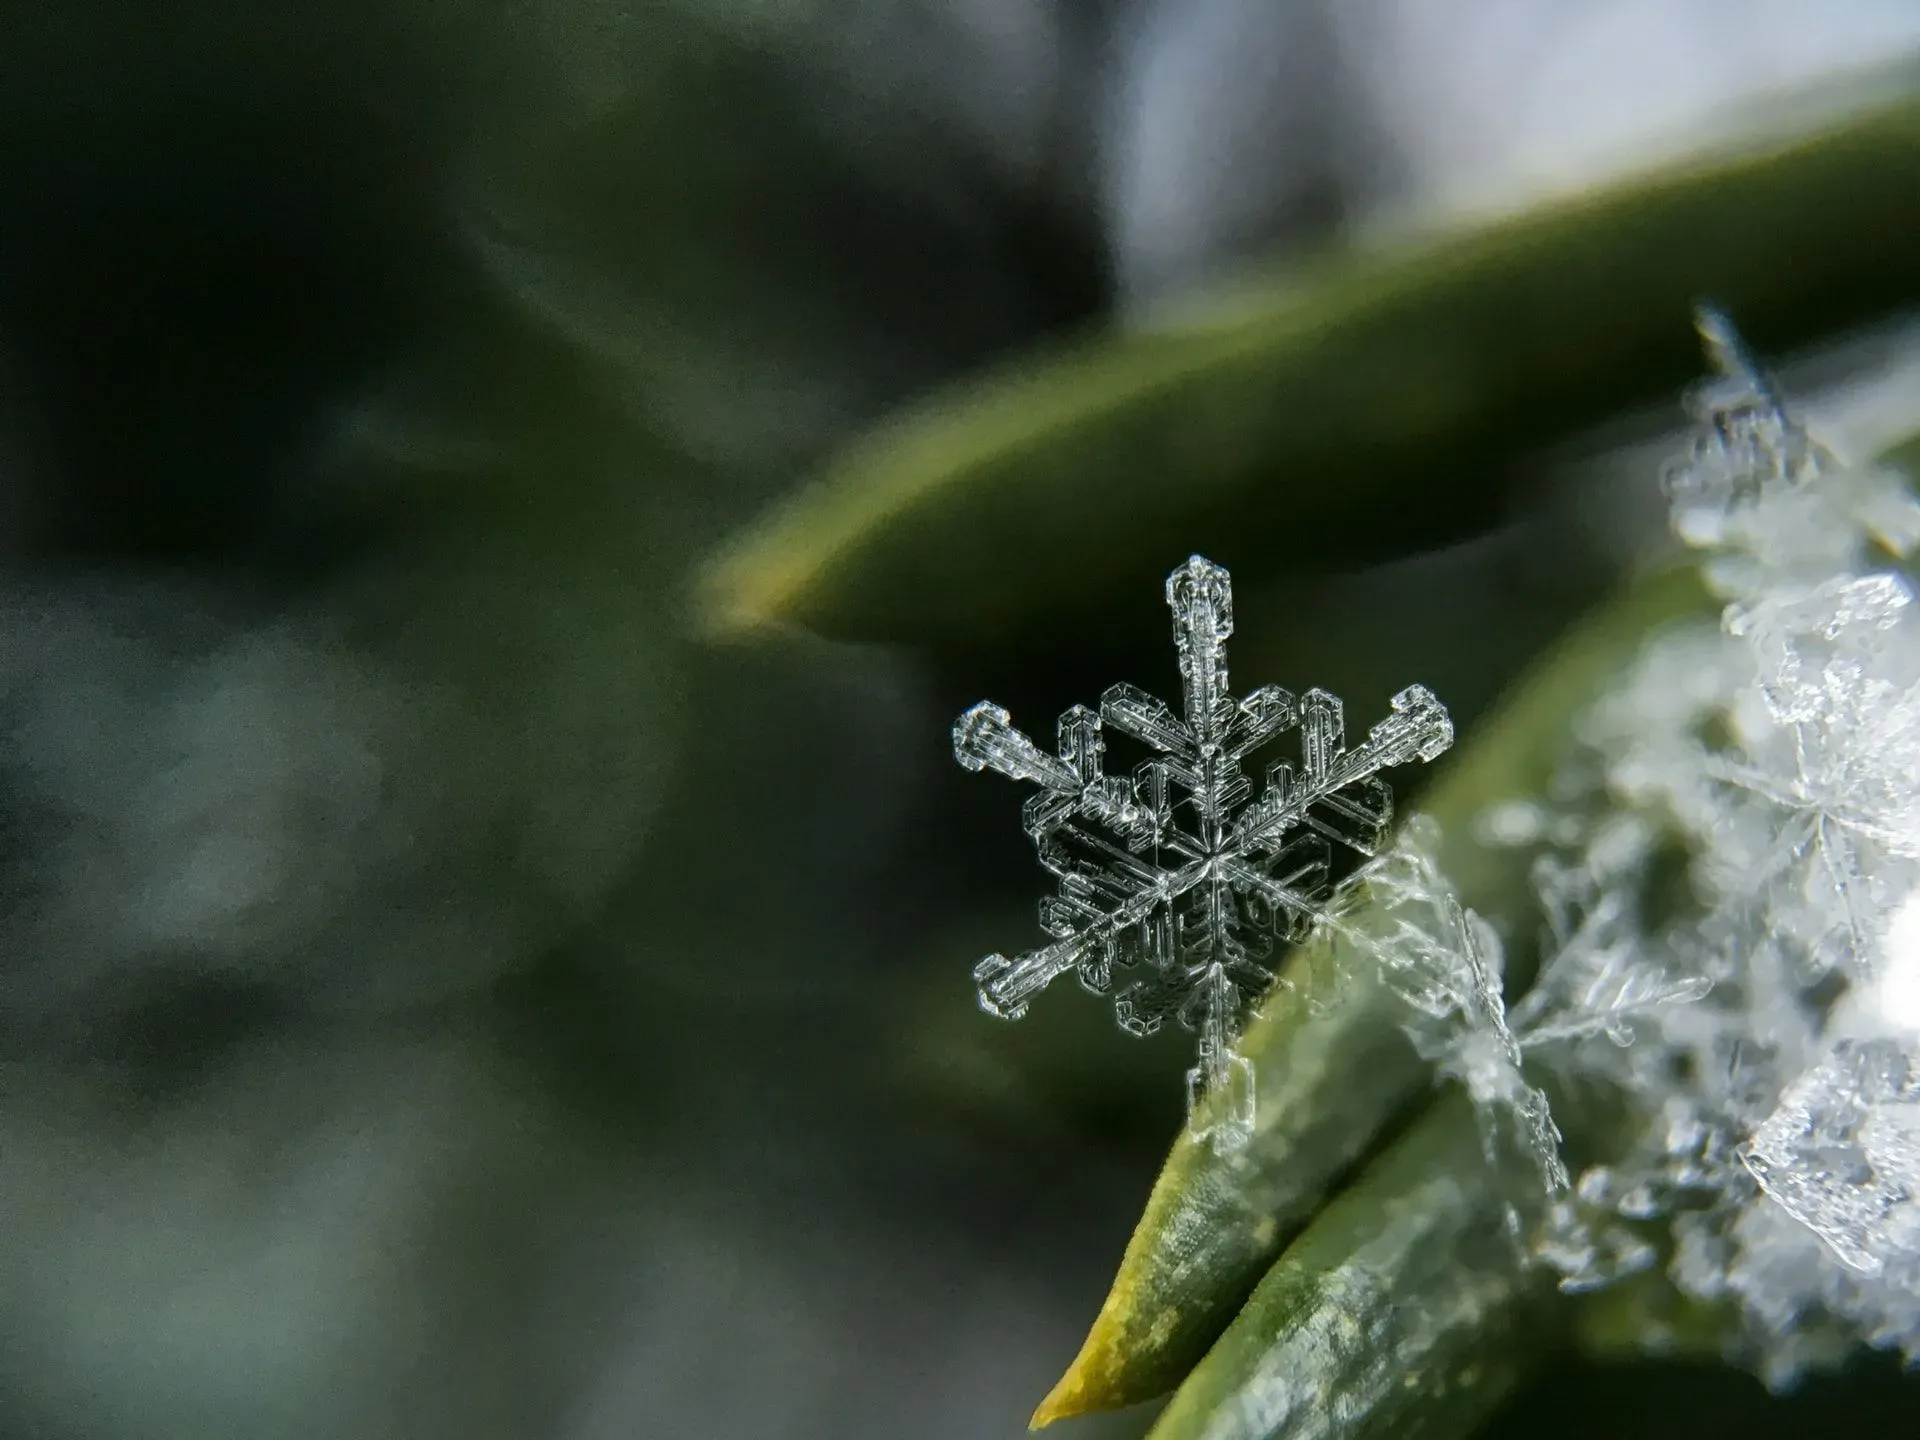 One of the fun facts about snowflakes is that it is unlikely to spot two identical snowflakes.